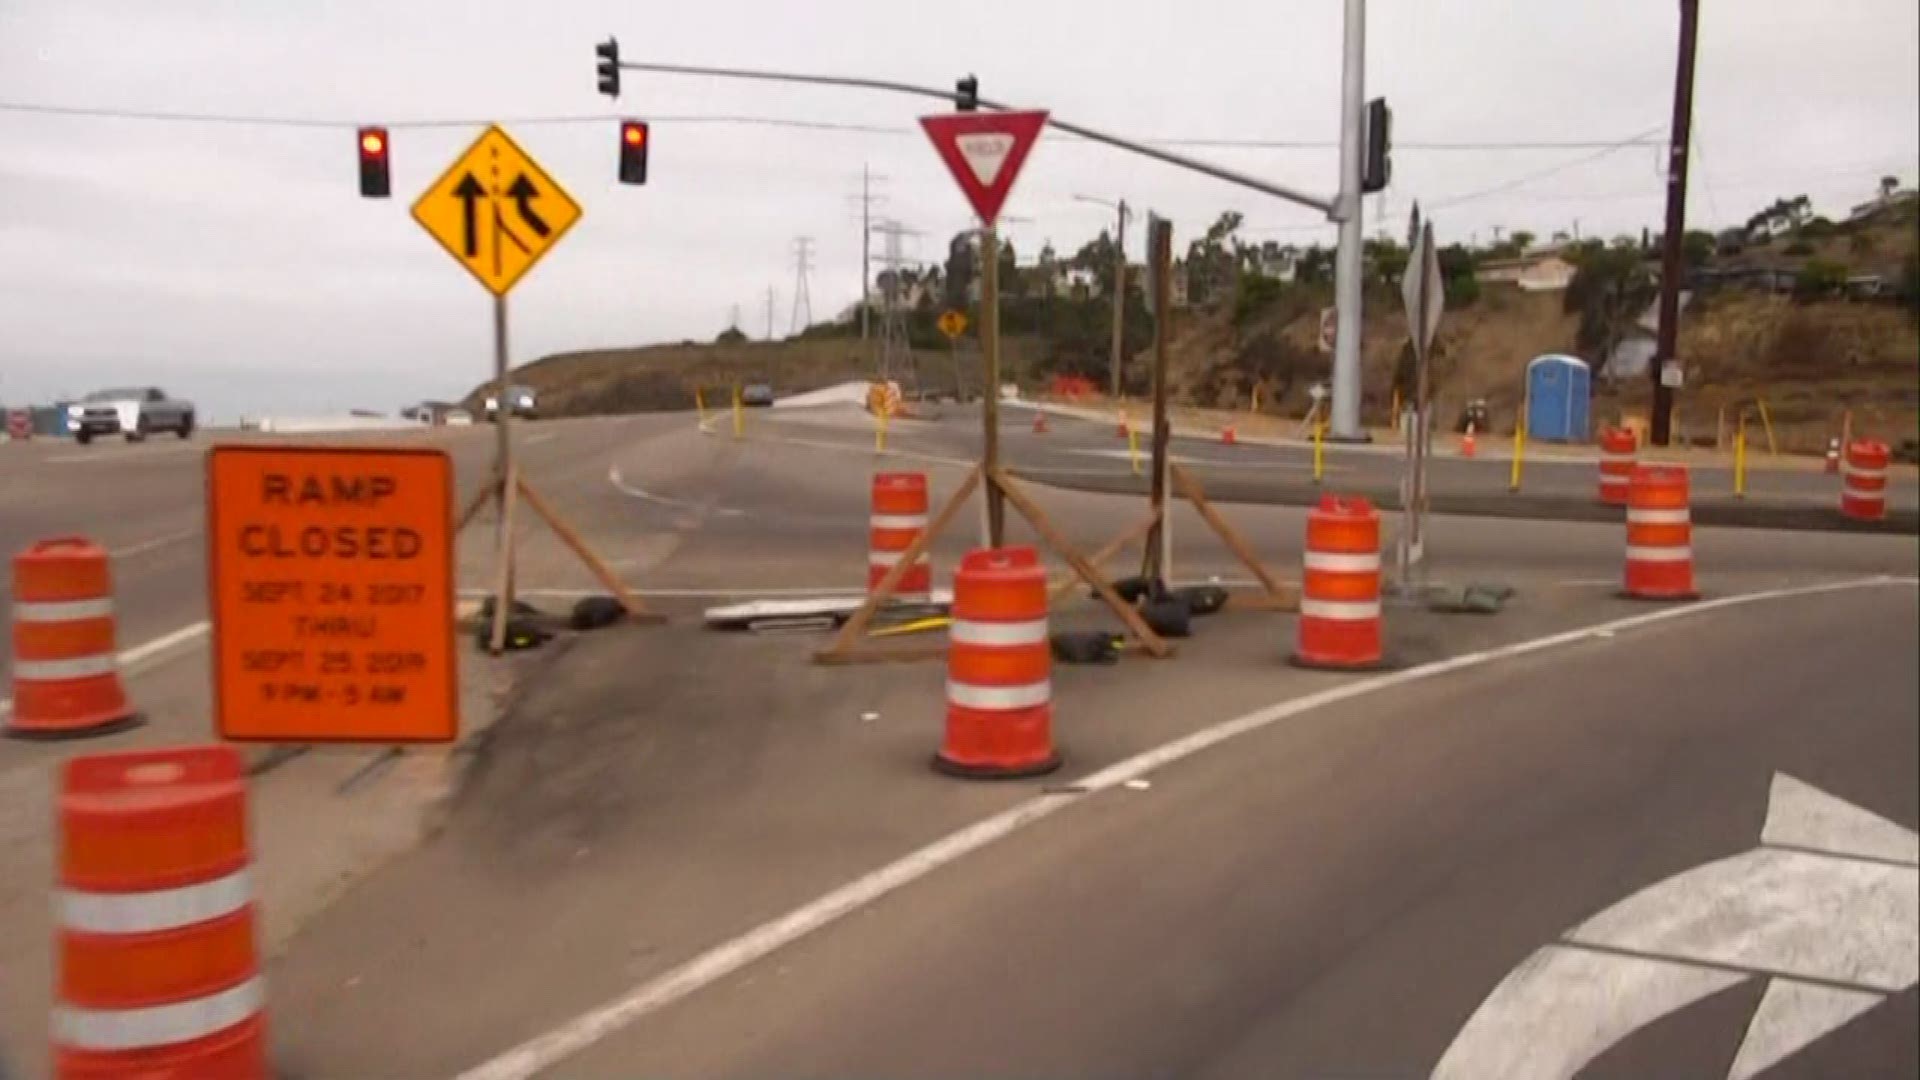 The $40 million project will widen the SR-163 Friars Road overcrossing as well as improve the SR-163 on- and off-ramps.